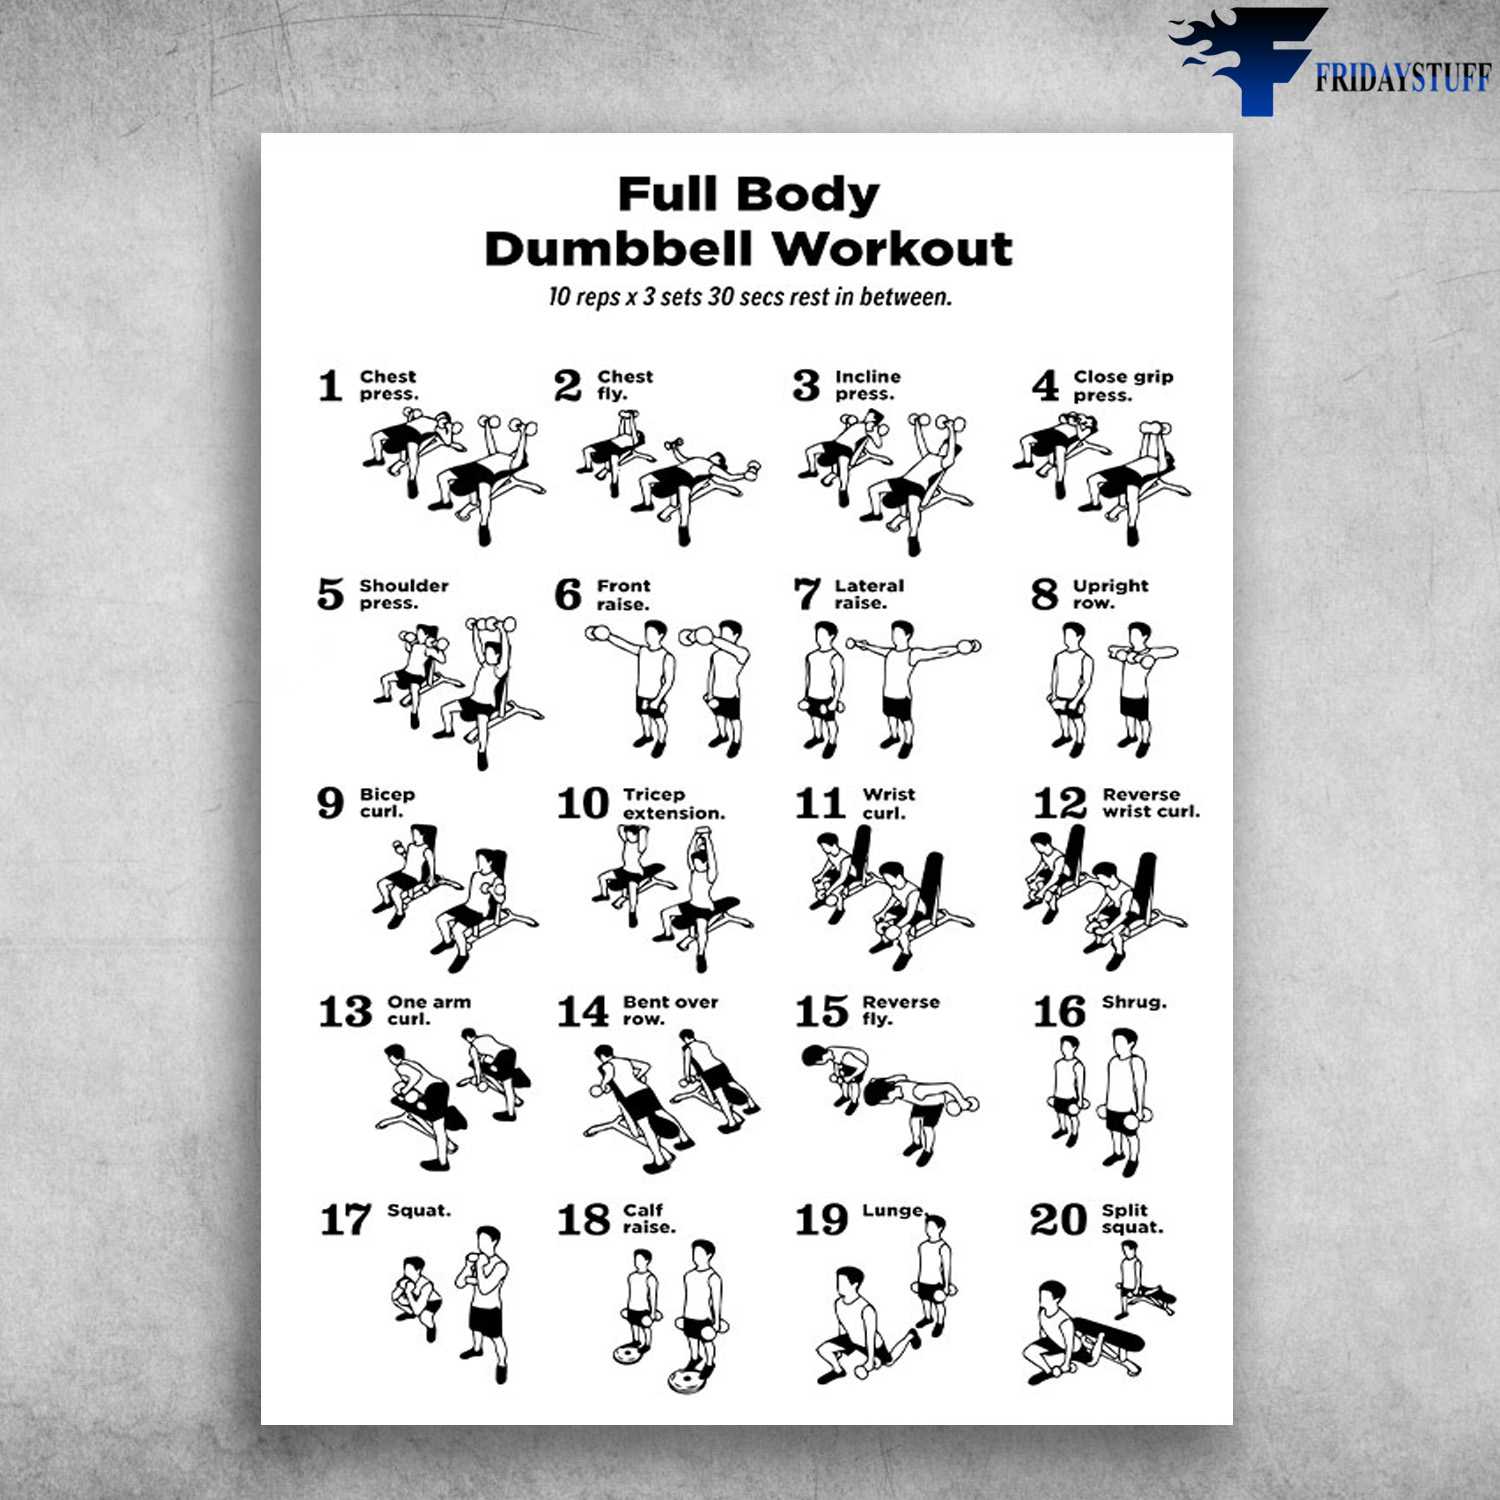 Full Body Dumbbell Workout, Gym Lover - 10 Reps x 3 Sets 30 Secs Rest In Between, Chest Press, Chest Fly, Incline Press, Close Grip Press